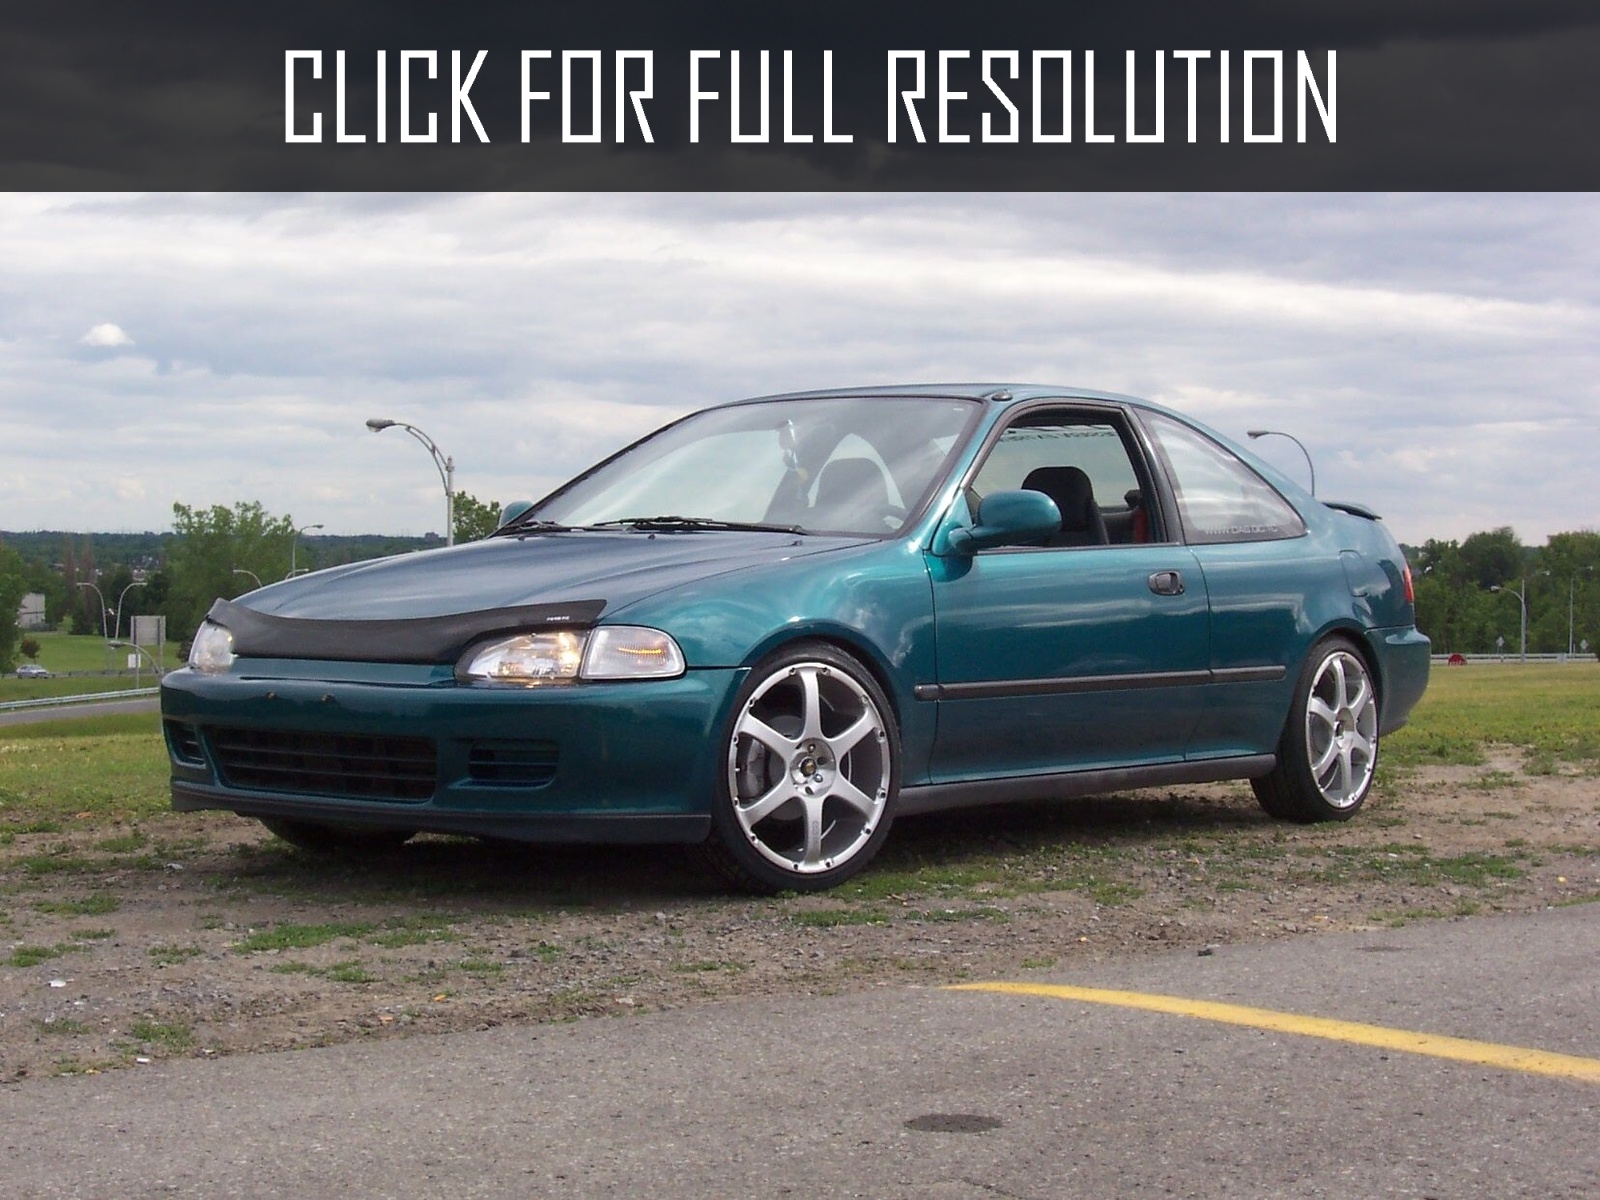 1995 Honda Civic Coupe news, reviews, msrp, ratings with